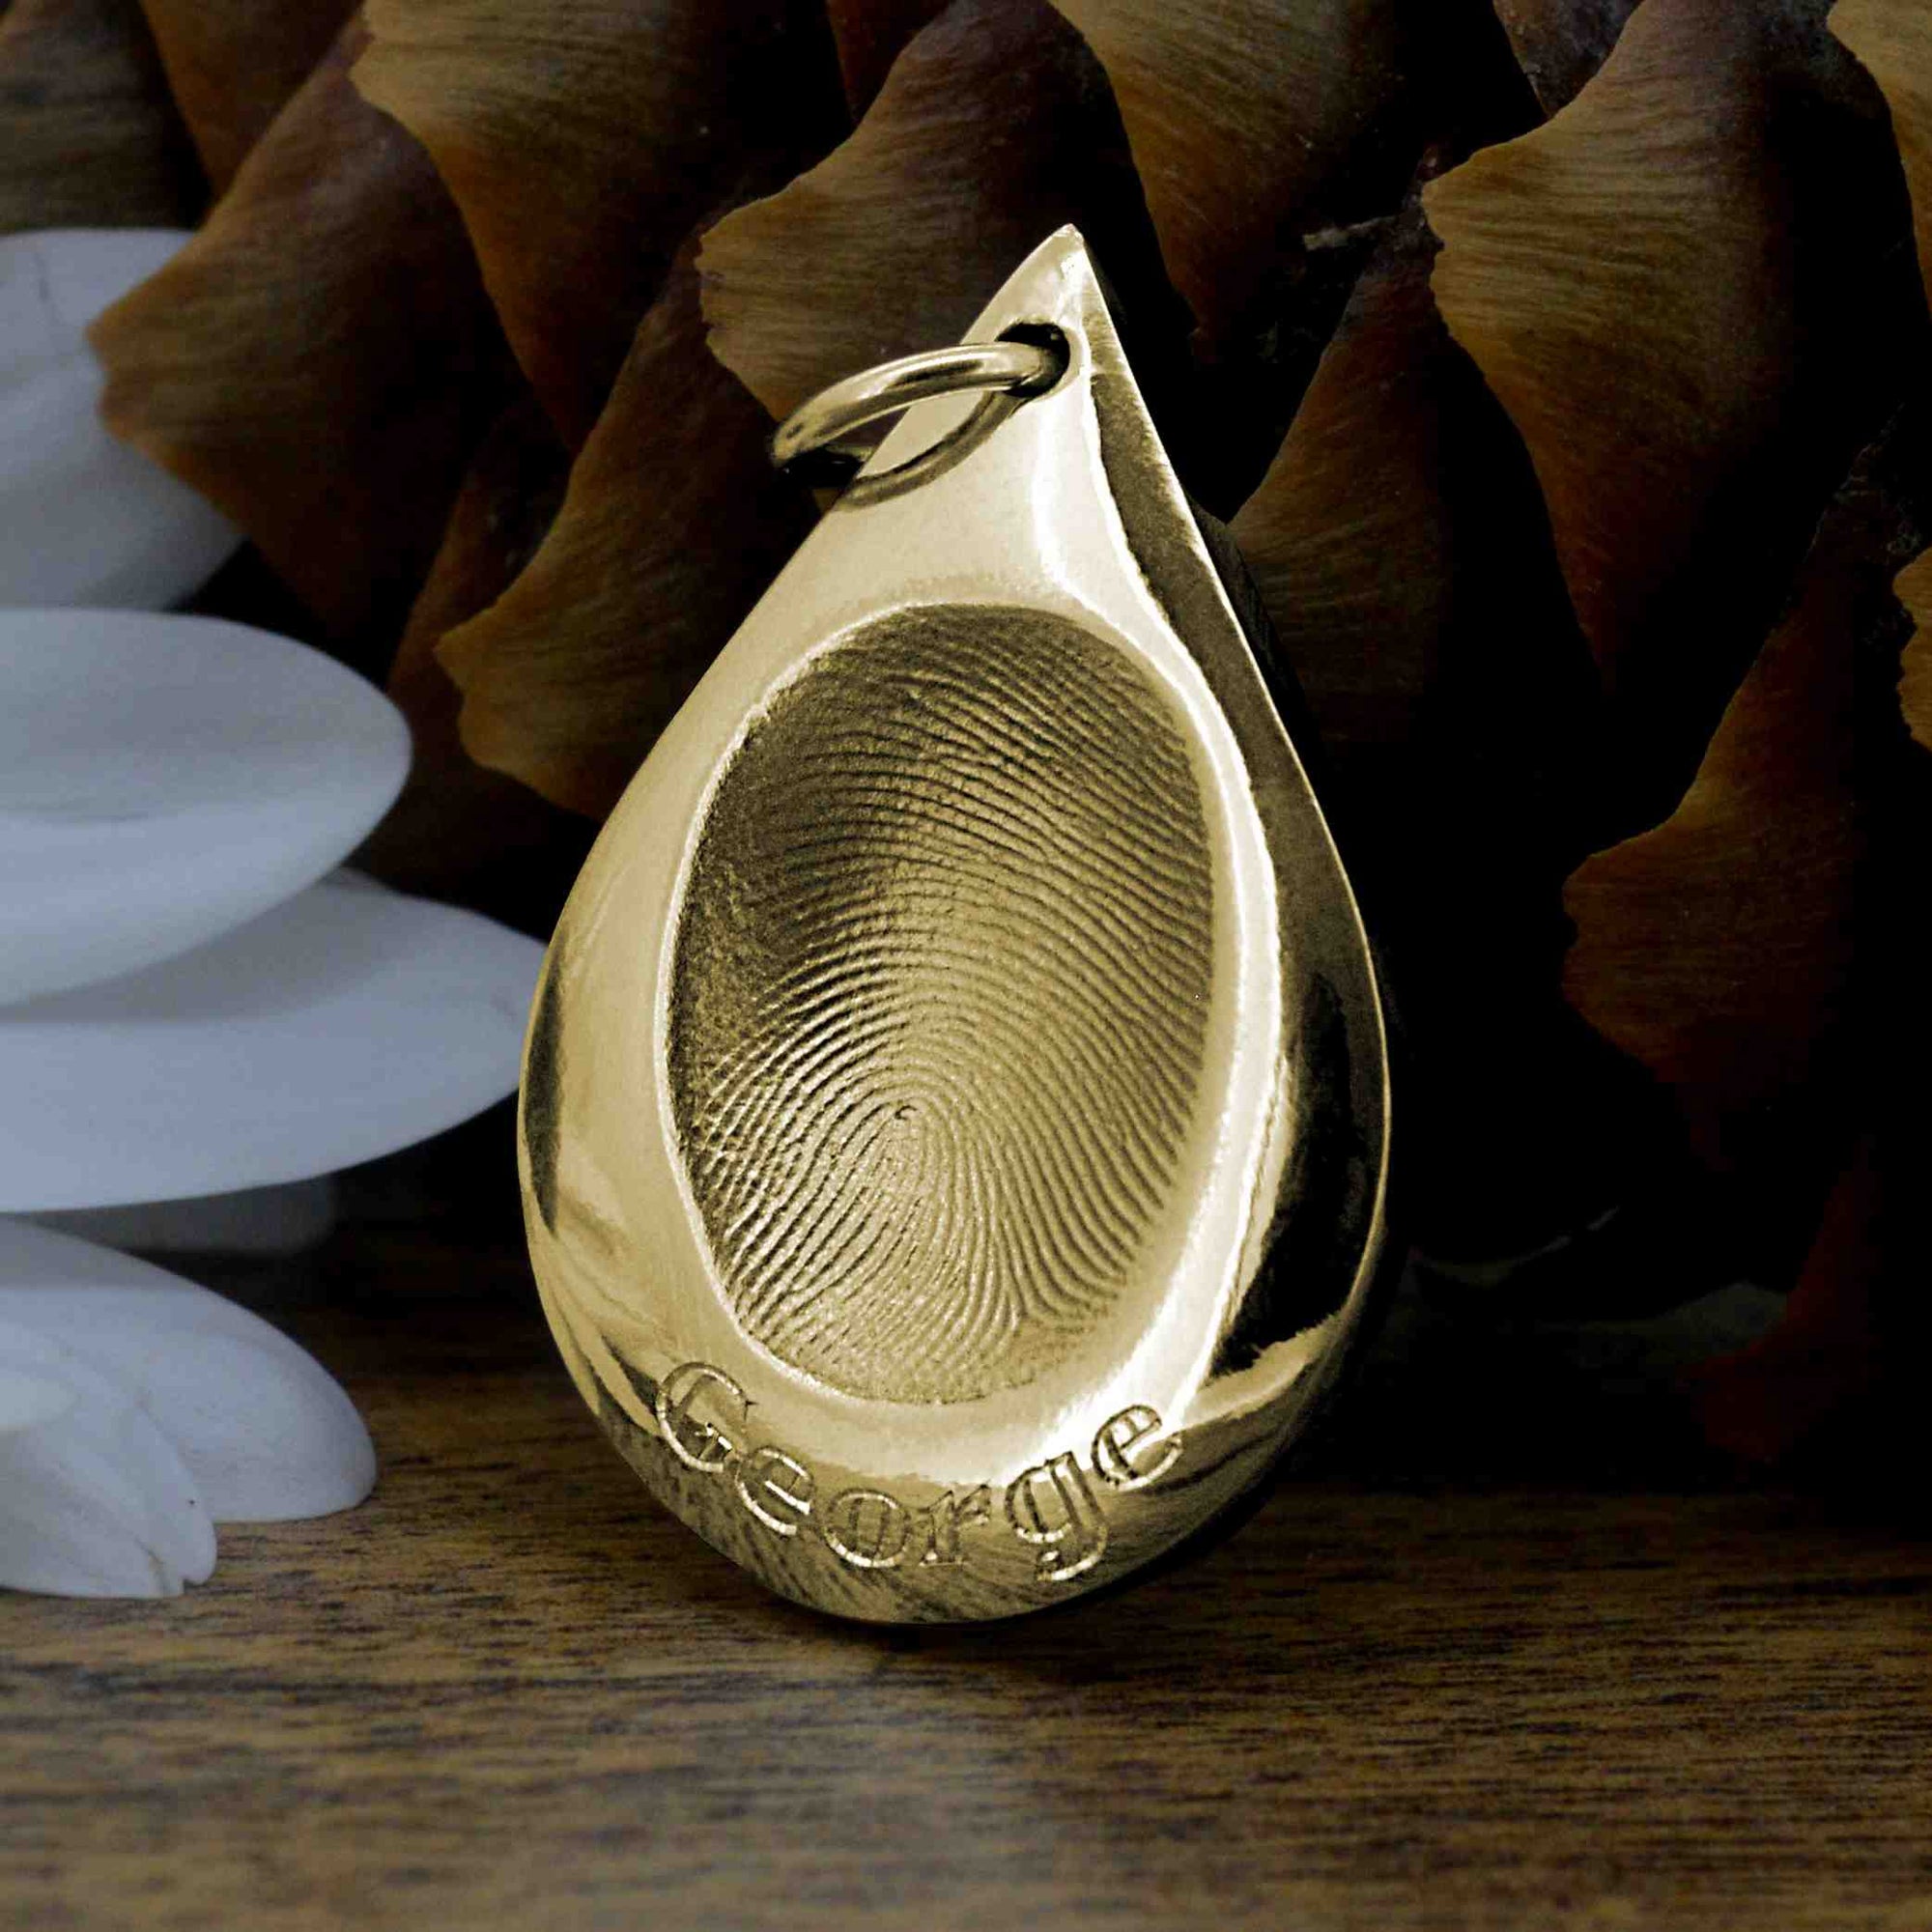 A solid gold teardrop-shaped necklace featuring a single adult fingerprint and the name George engraved underneath.  It sits on a dark wood background with a white flower and a pine cone behind it.